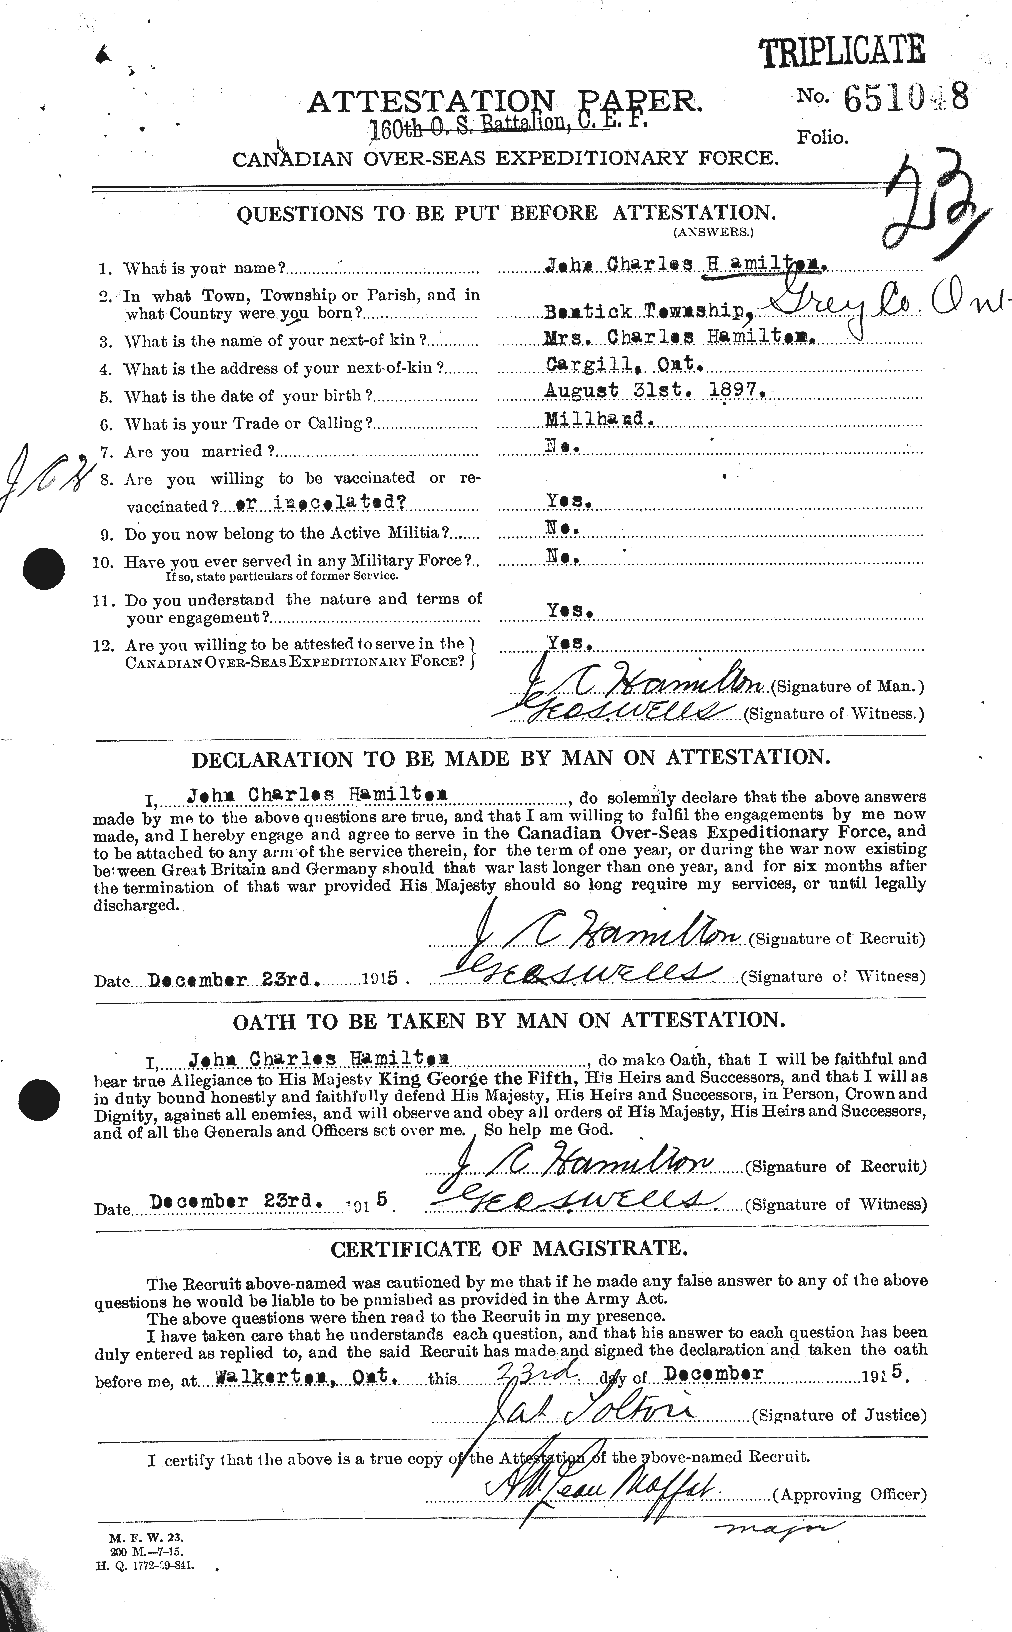 Personnel Records of the First World War - CEF 373071a